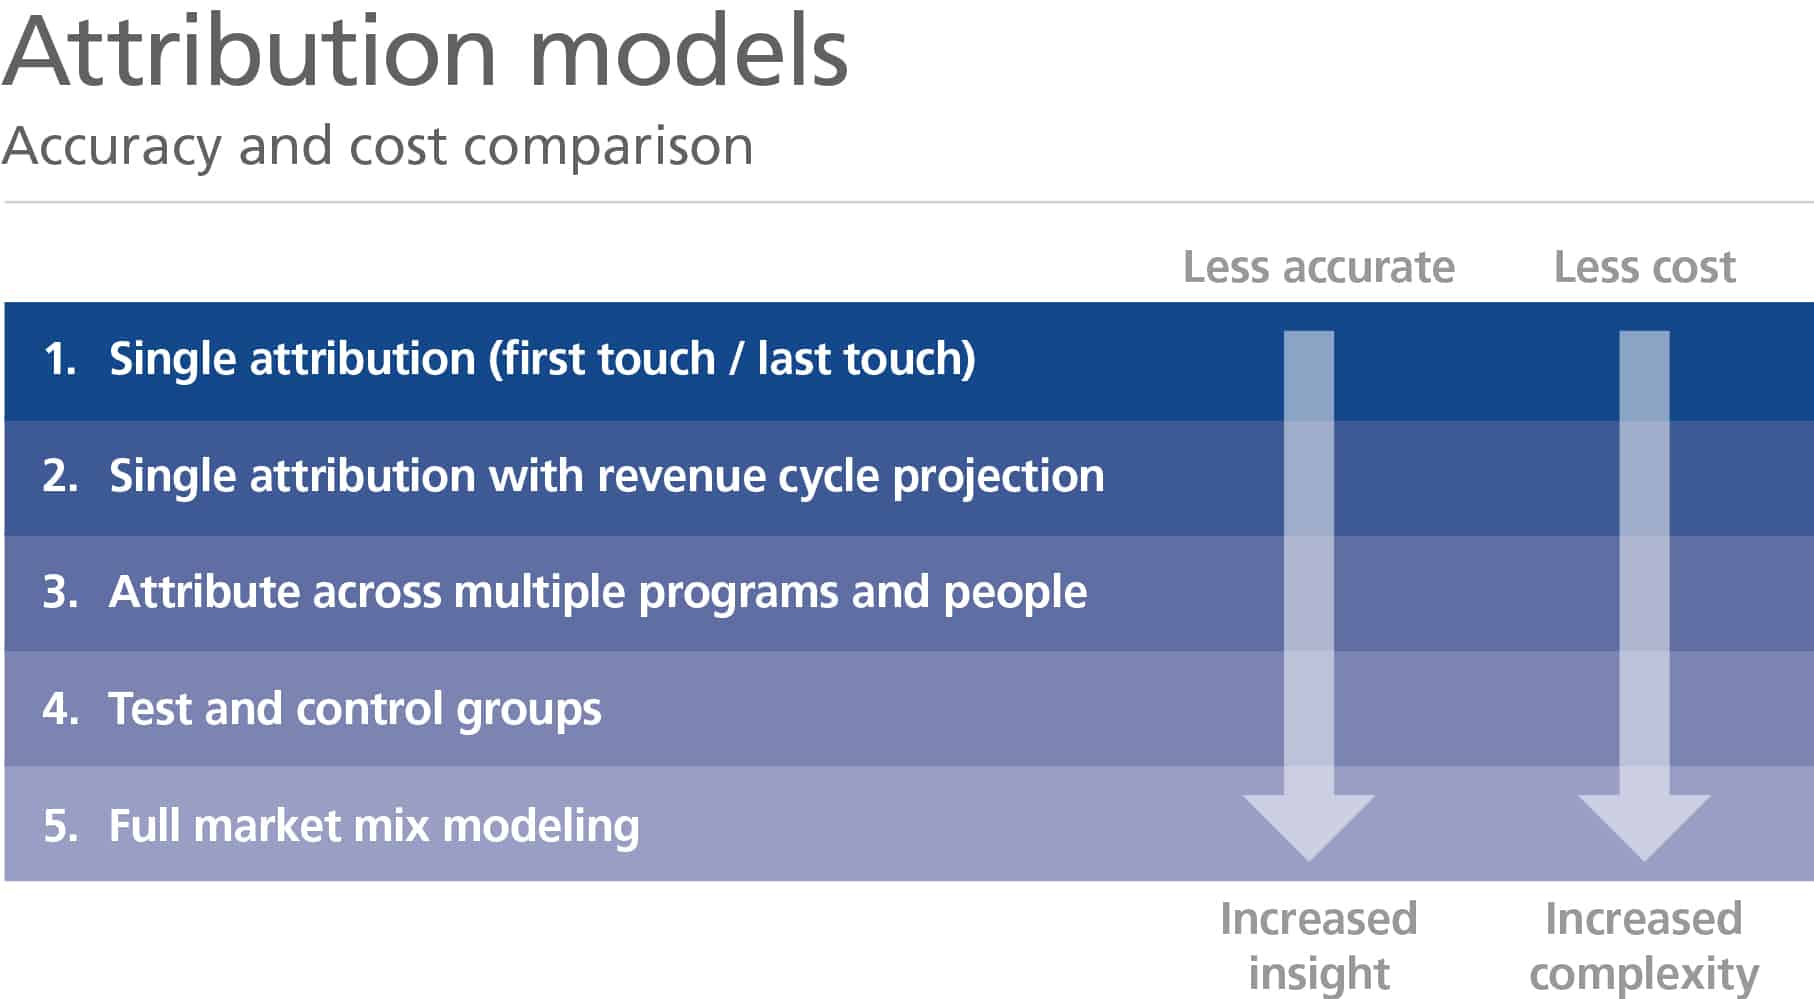 Chart showing the accuracy and cost comparison of the different attribution models